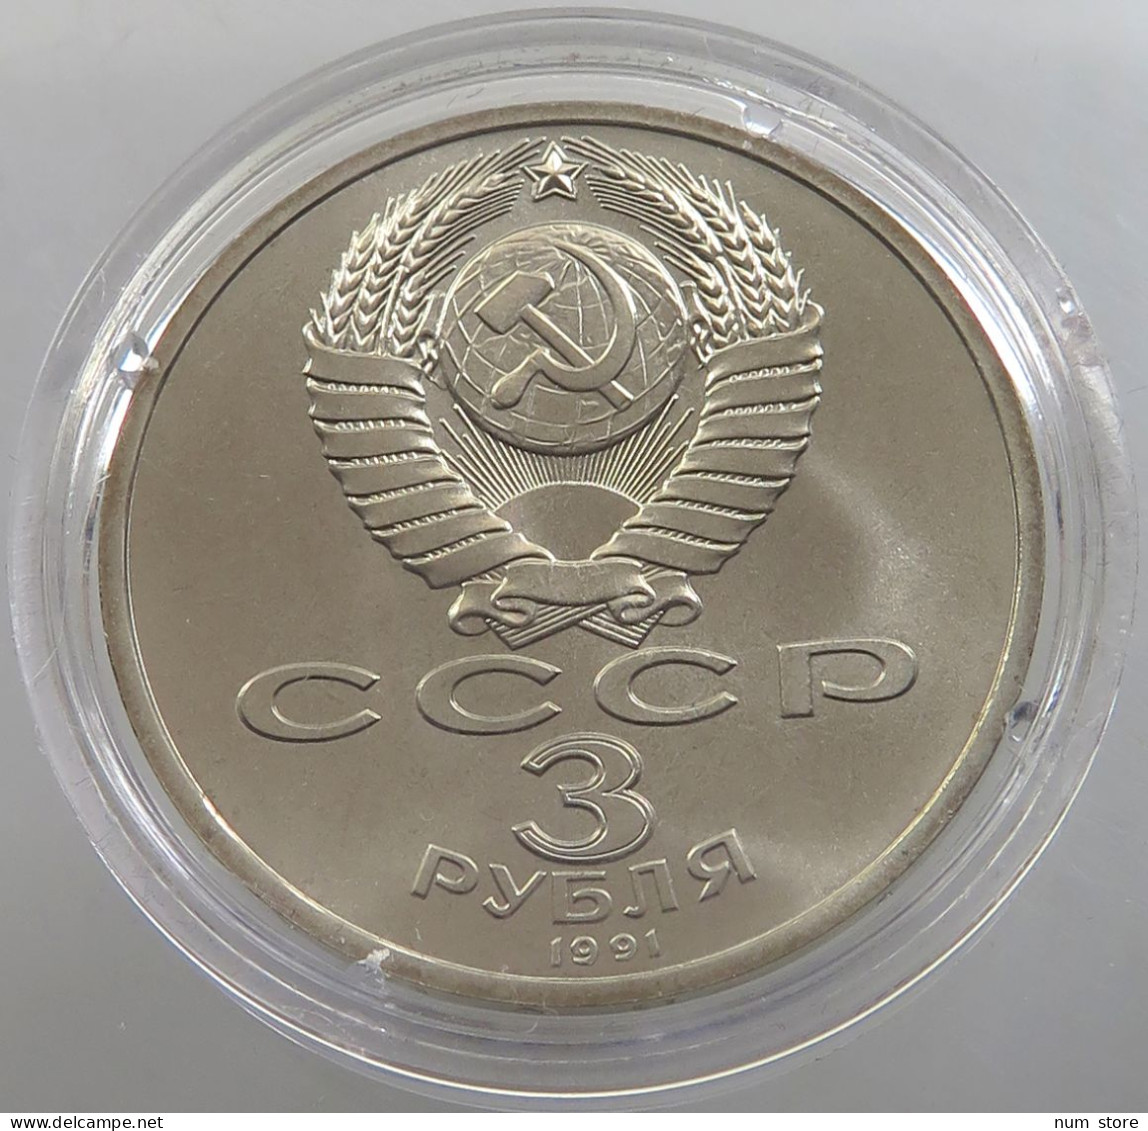 RUSSIA USSR 3 ROUBLES 1991 UNC #sm14 0465 - Russia